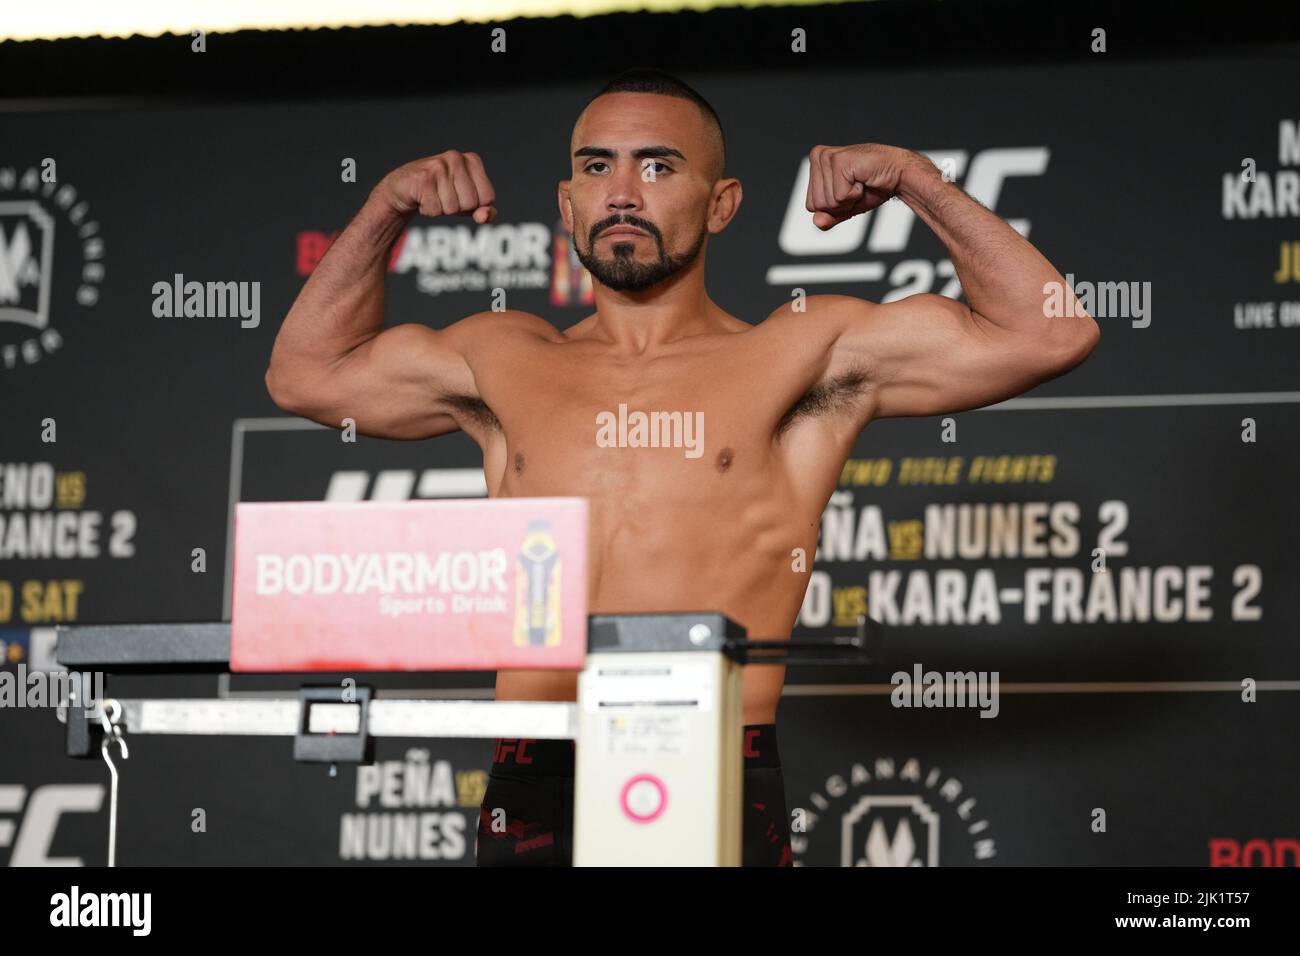 Dallas, Texas, USA 29th July, 2022. DALLAS, TX - JULY 29: Rafa Garcia steps on the scale for the official fight weigh-in at Hyatt Regency Dallas for UFC 277: PeÃ±a v Nunes 2 on July 29, 2022 in Dallas, Texas, United States. Credit: ZUMA Press, Inc./Alamy Live News Stock Photo